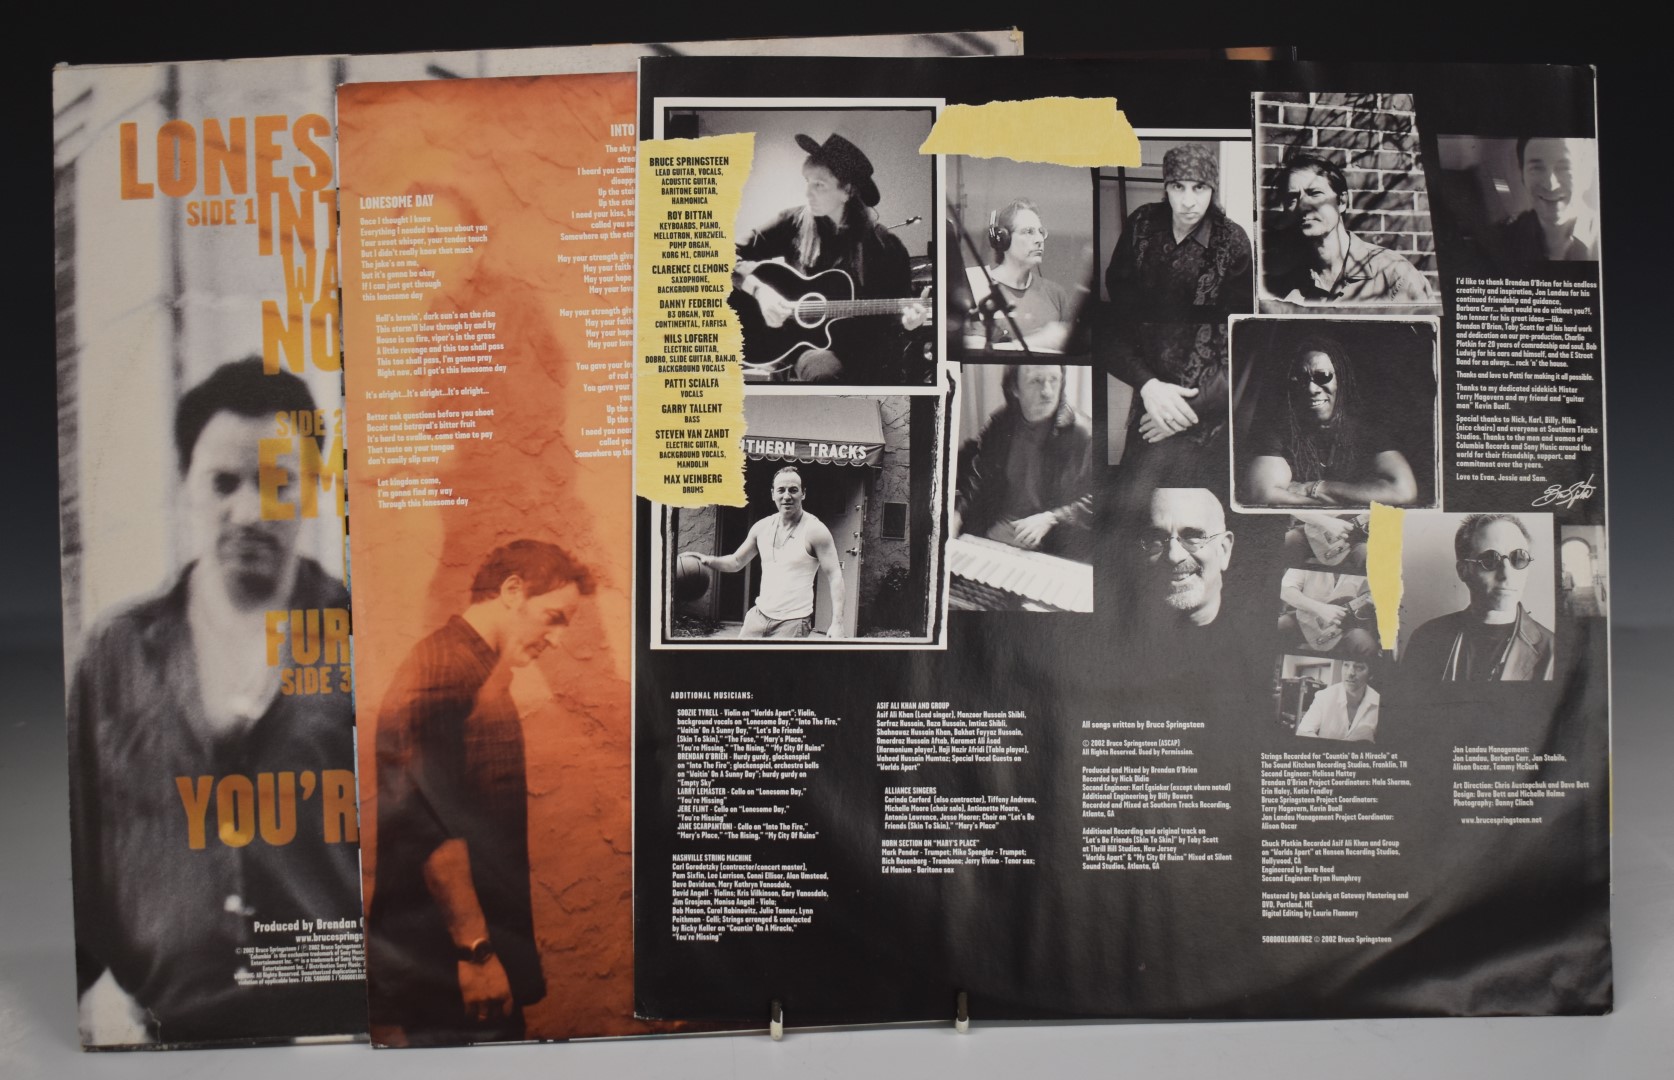 Bruce Springsteen - The Rising (COL 5080001), records appear EX, inners VG with wear to cover and - Image 3 of 3